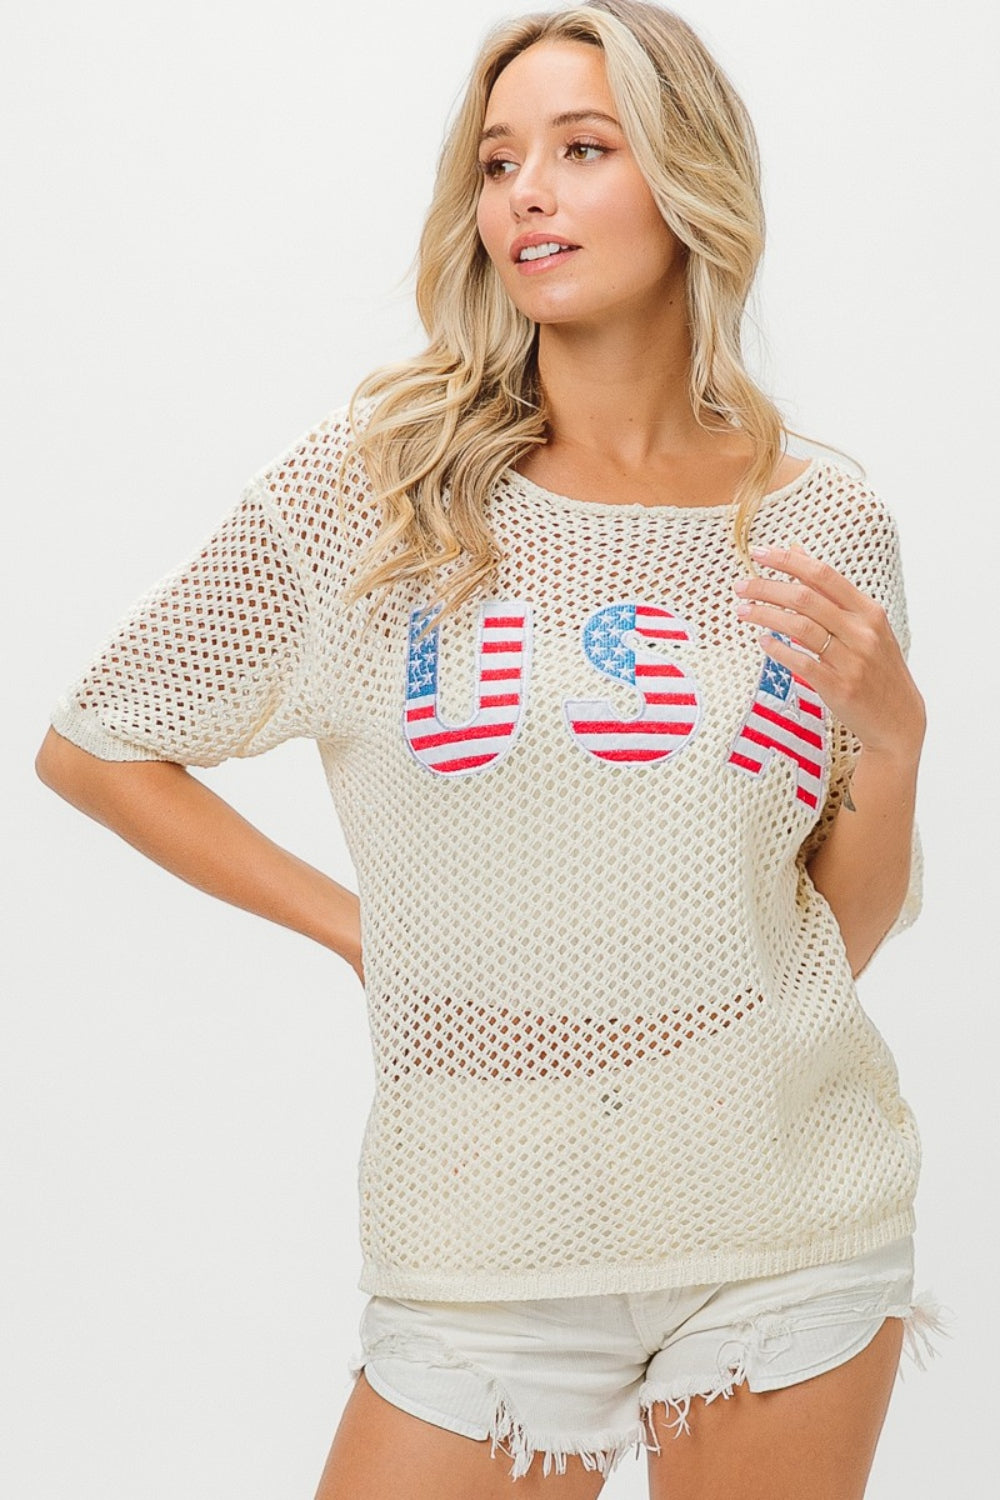 US Flag Theme Knit Cover Up  Sunset and Swim   